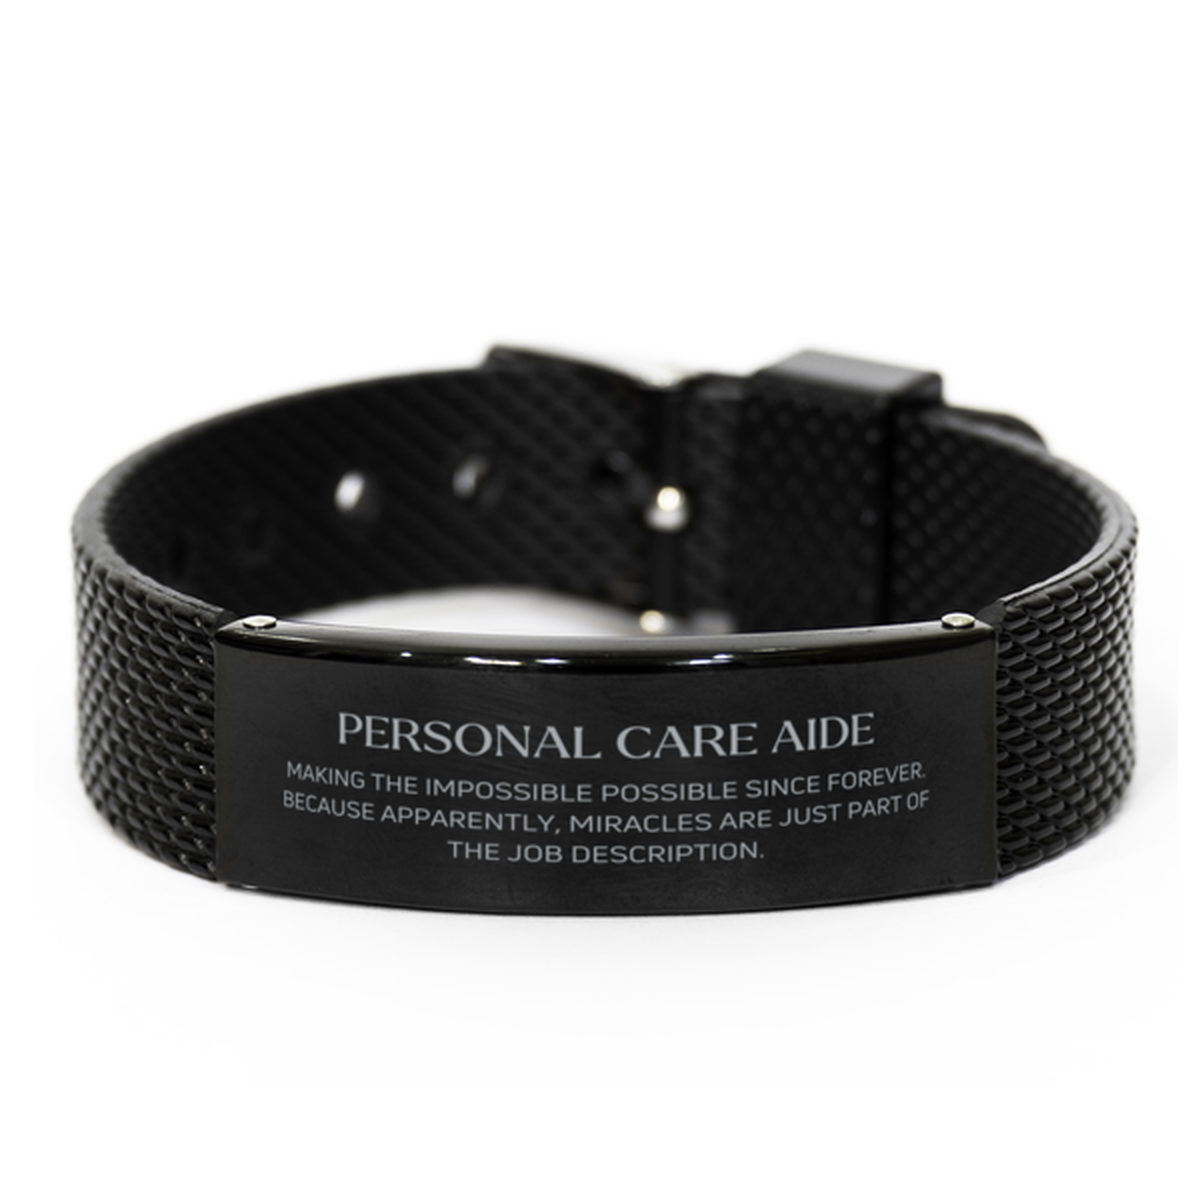 Funny Personal Care Aide Gifts, Miracles are just part of the job description, Inspirational Birthday Black Shark Mesh Bracelet For Personal Care Aide, Men, Women, Coworkers, Friends, Boss